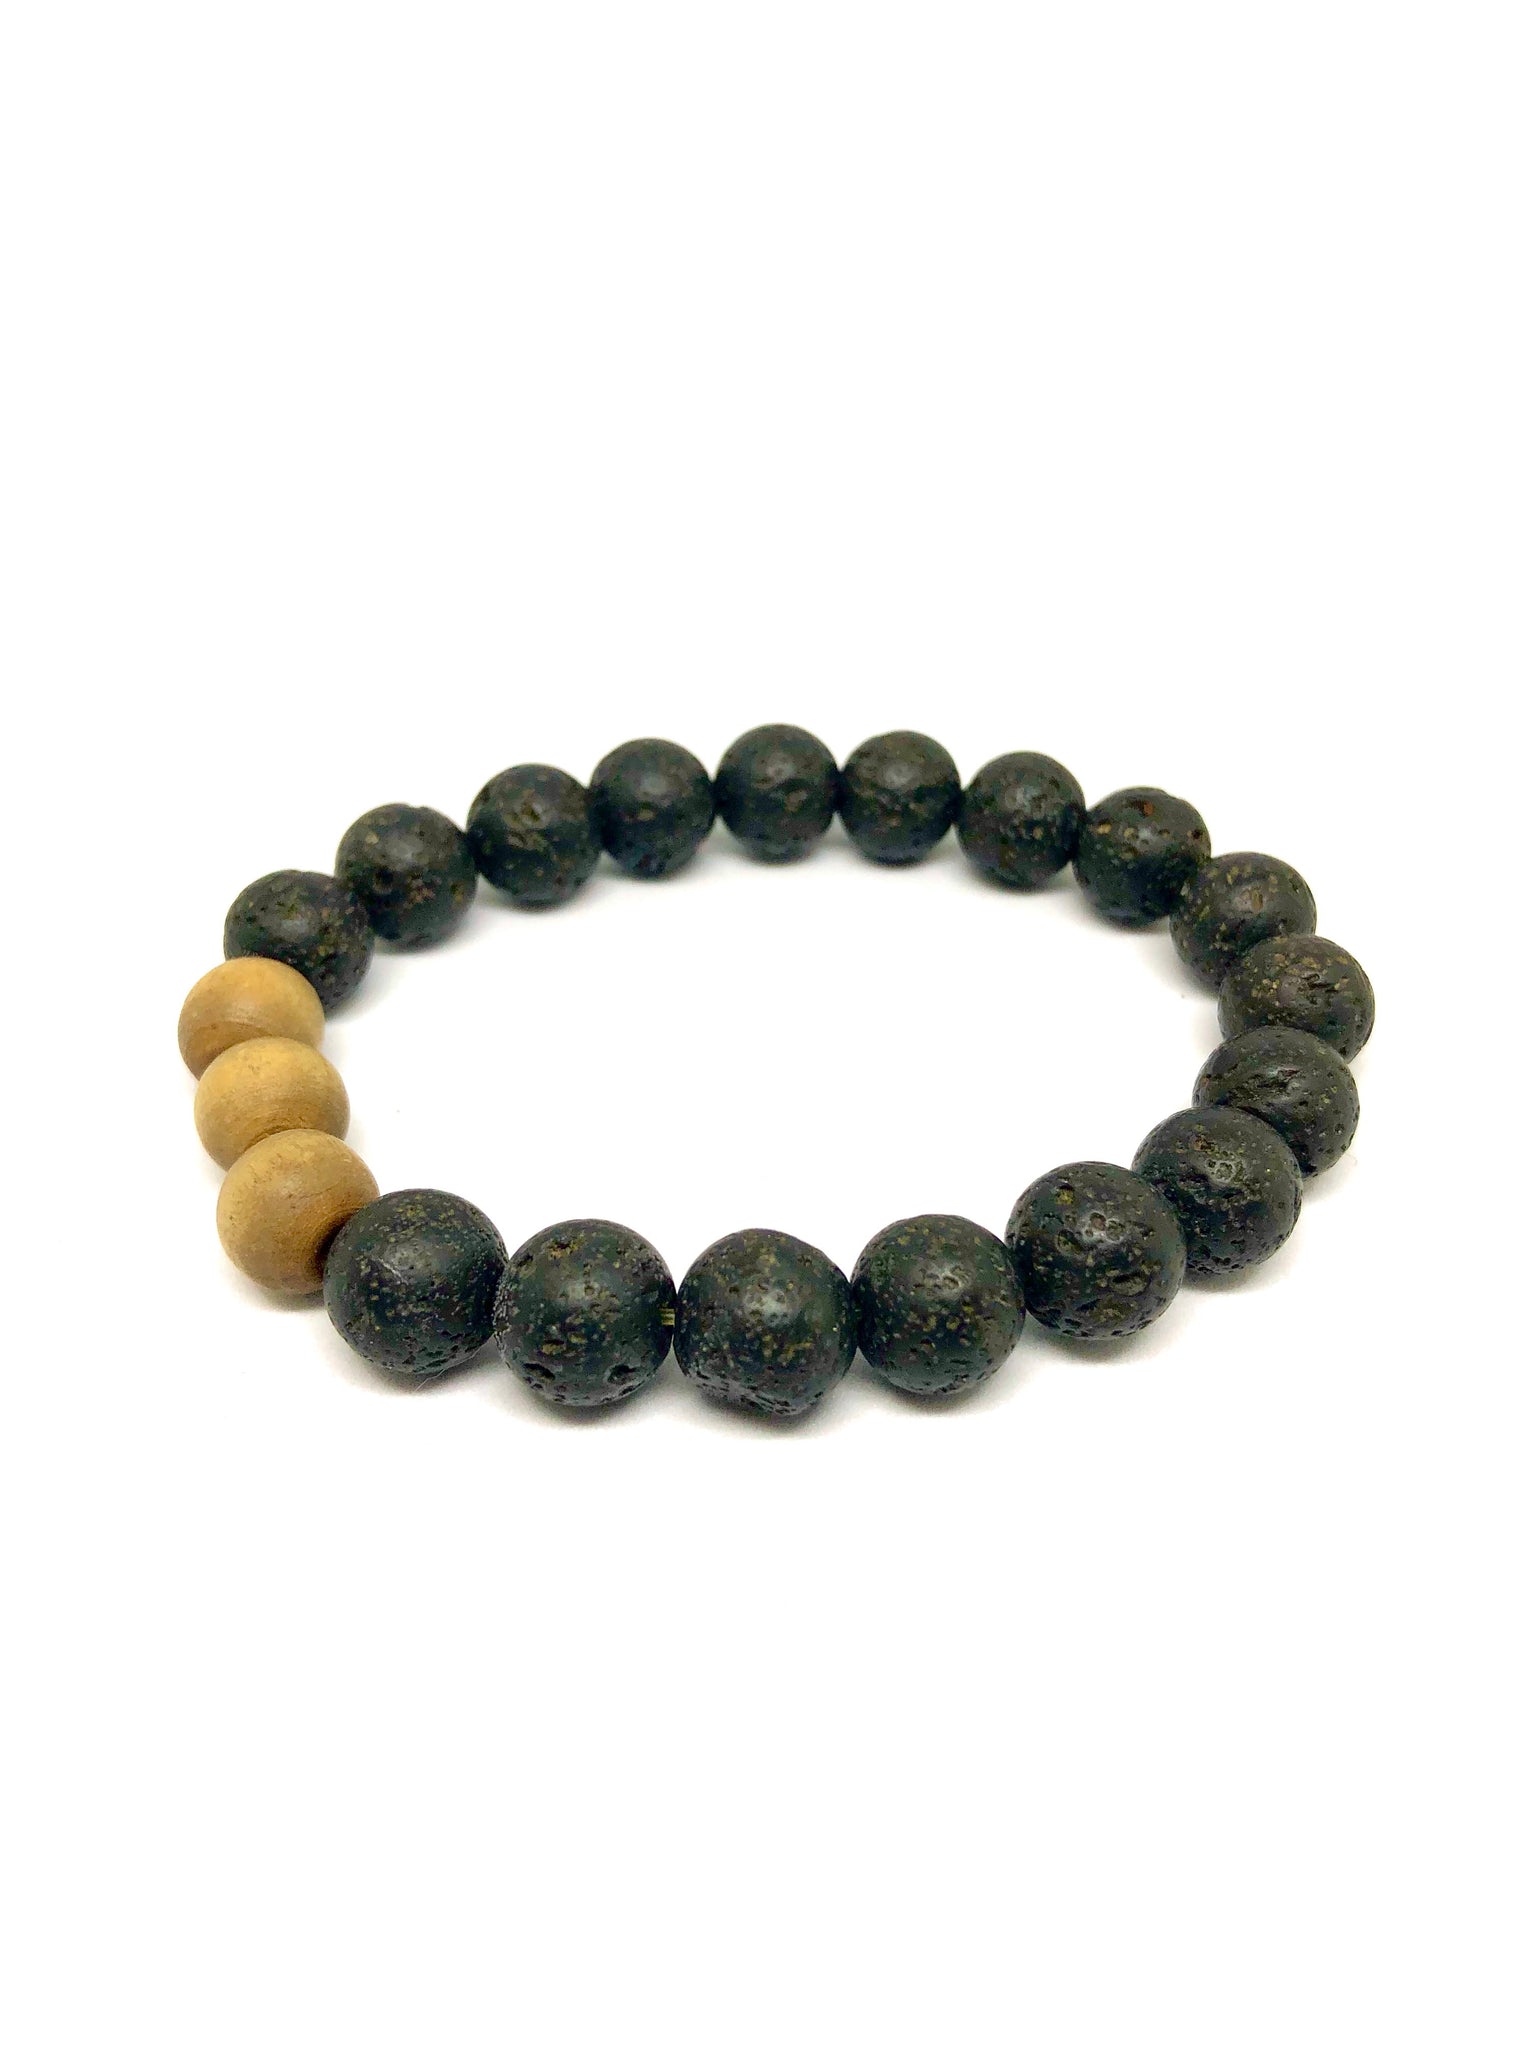 Men's Essential Oil Diffuser Bracelet// Coconut & Wood// Aromatherapy –  Drops of Wellness Goods